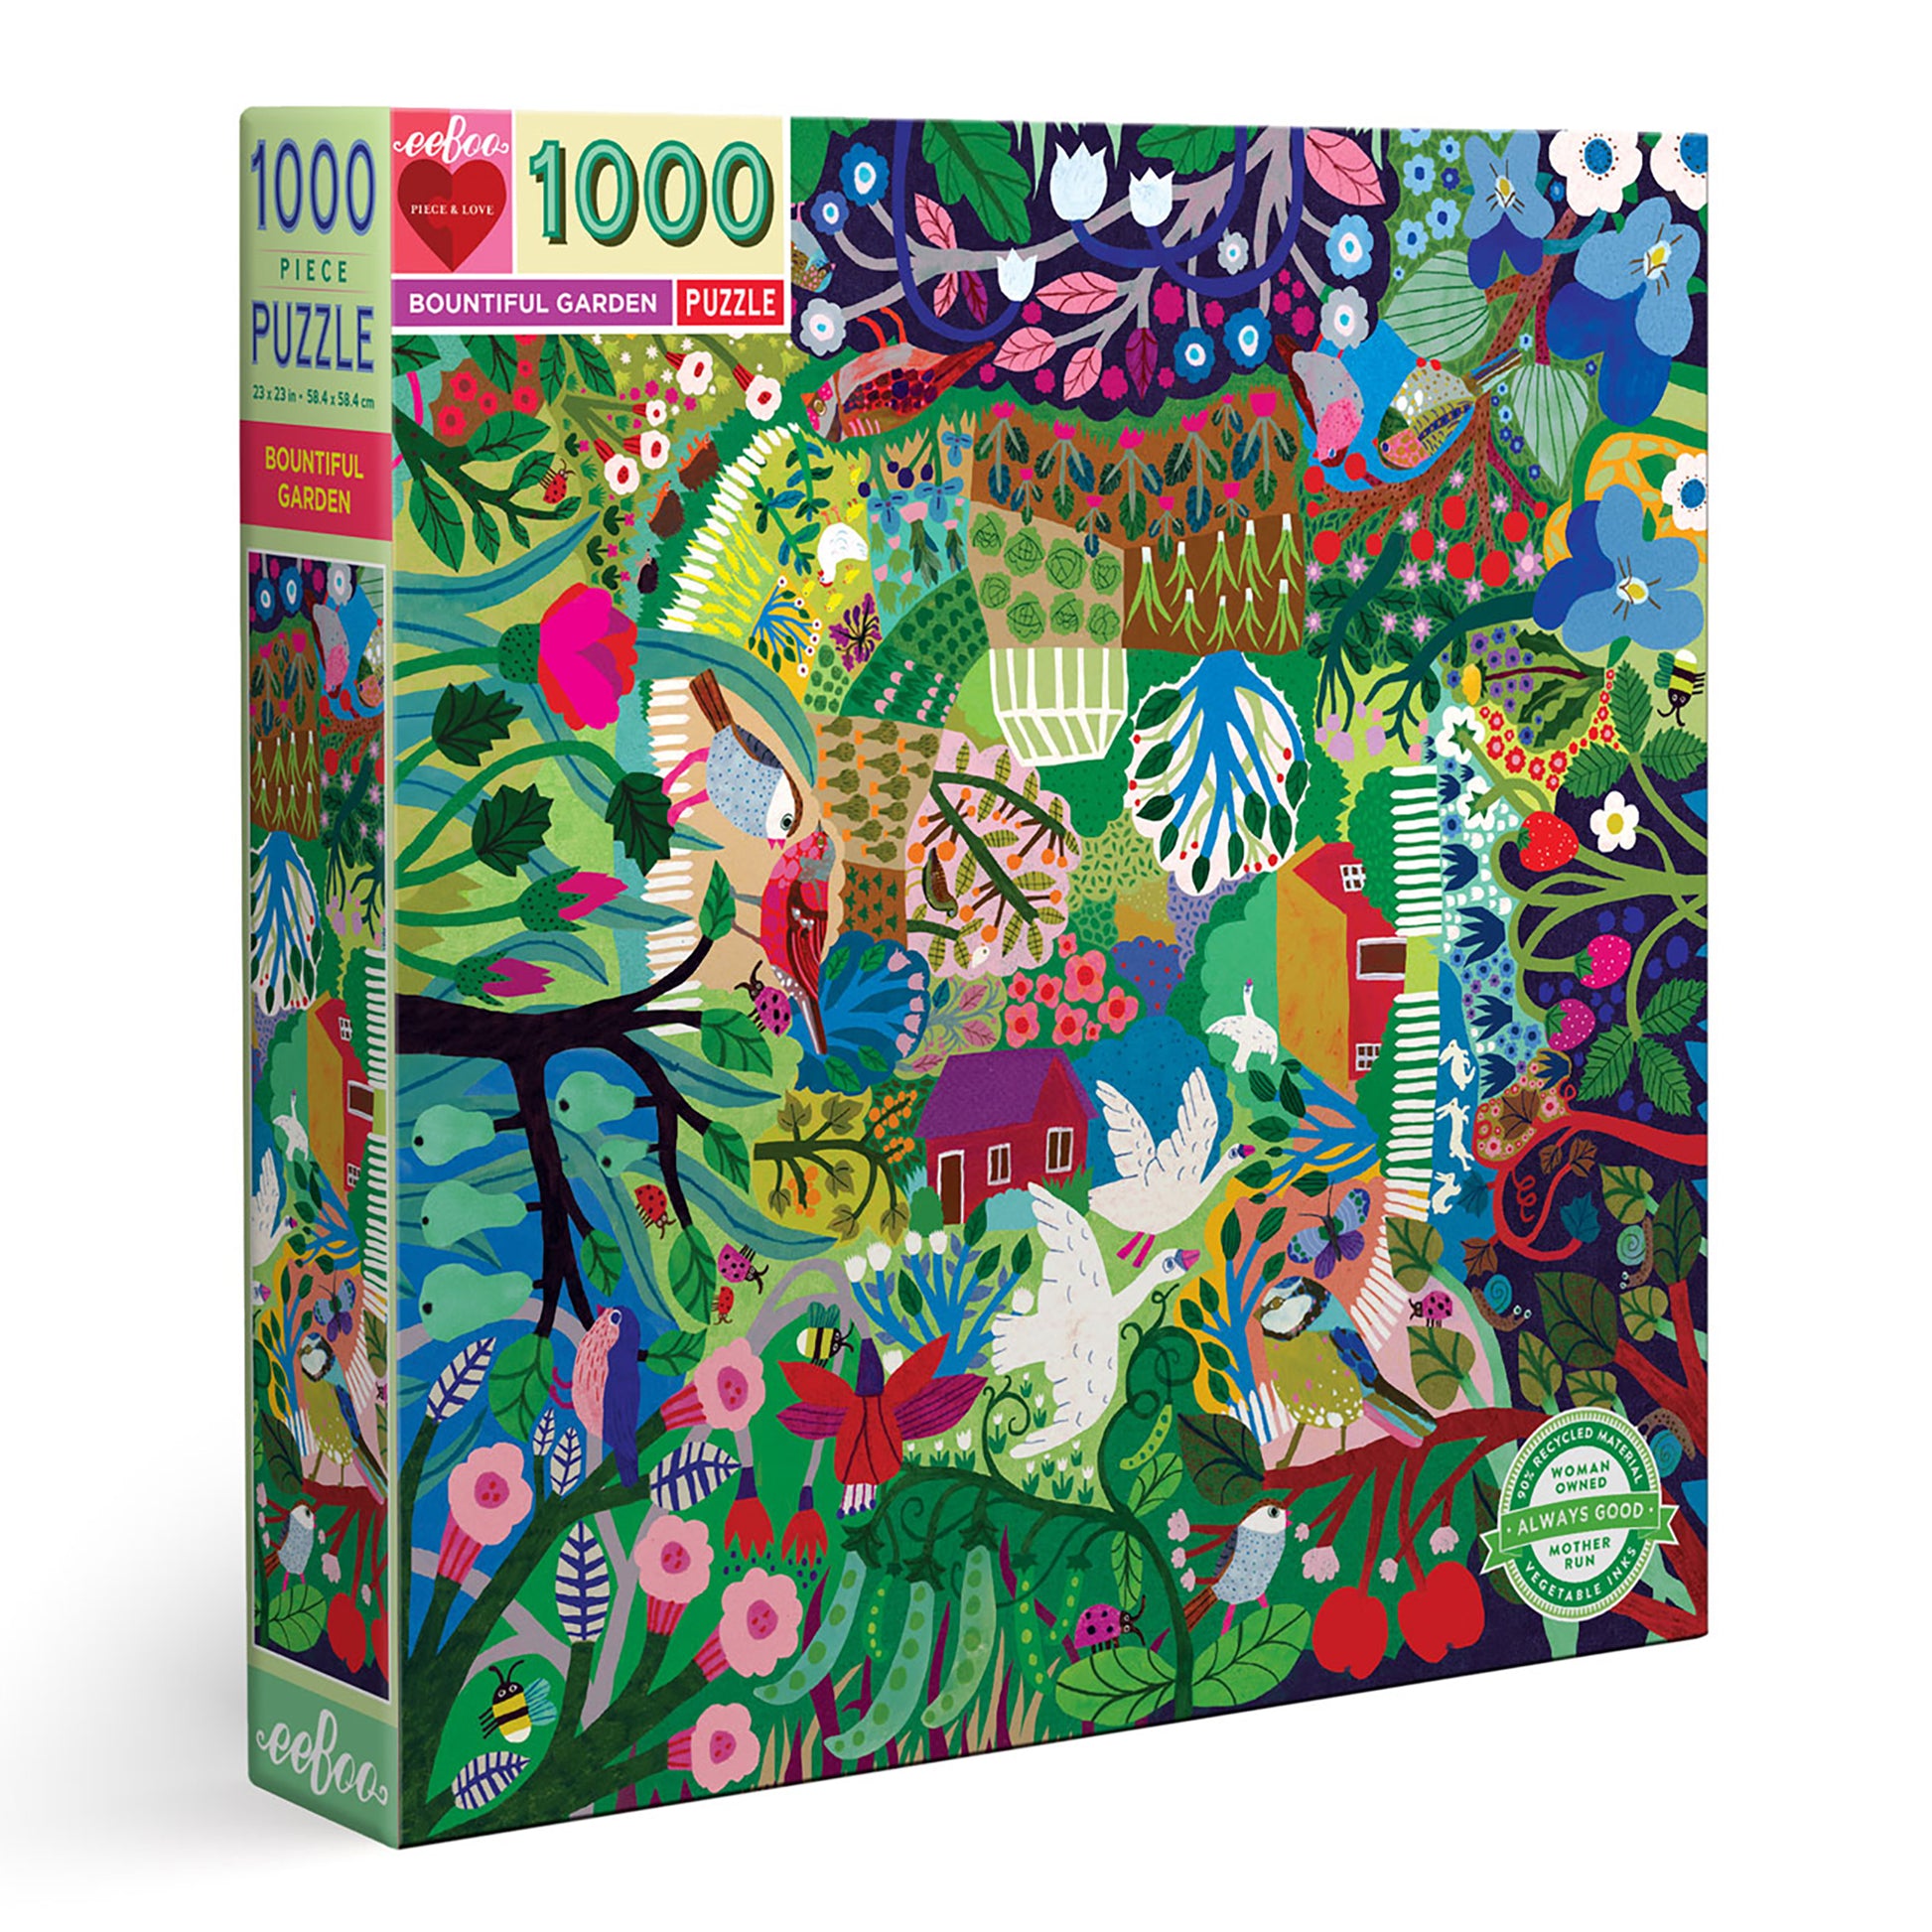 Bountiful Garden 1000 Piece Jigsaw Puzzle | eeBoo Piece & Love | Gifts for Nature Lovers